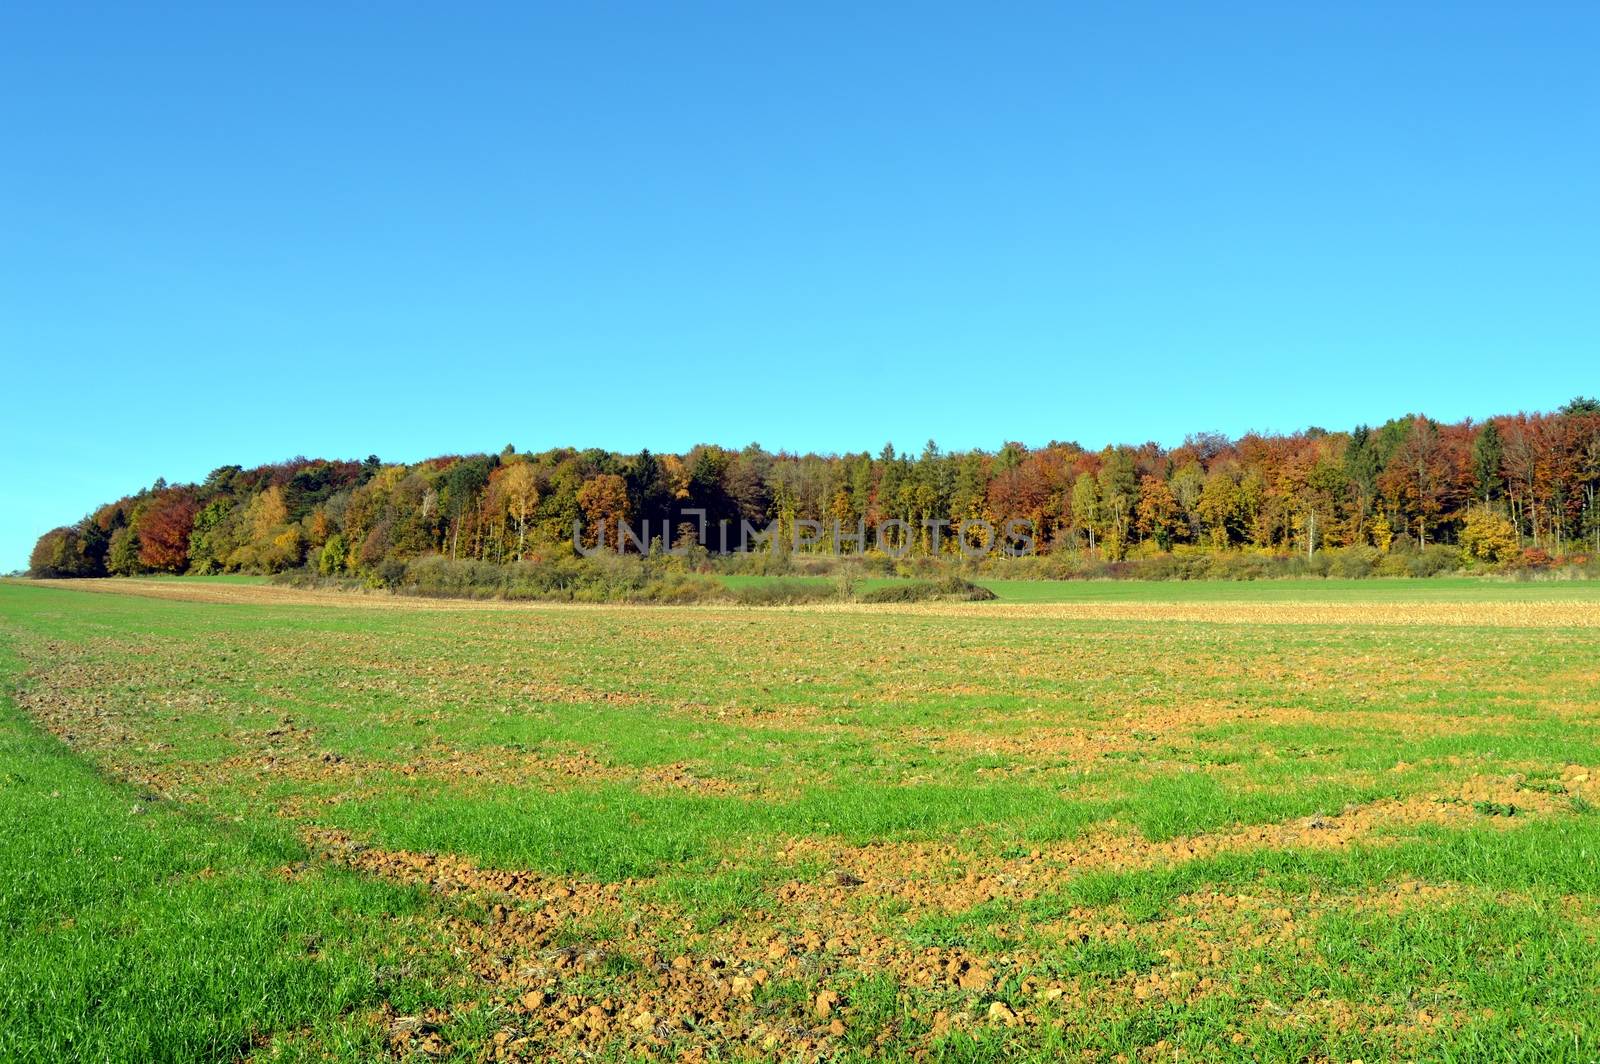 plow fields with autumn trees  by Philou1000